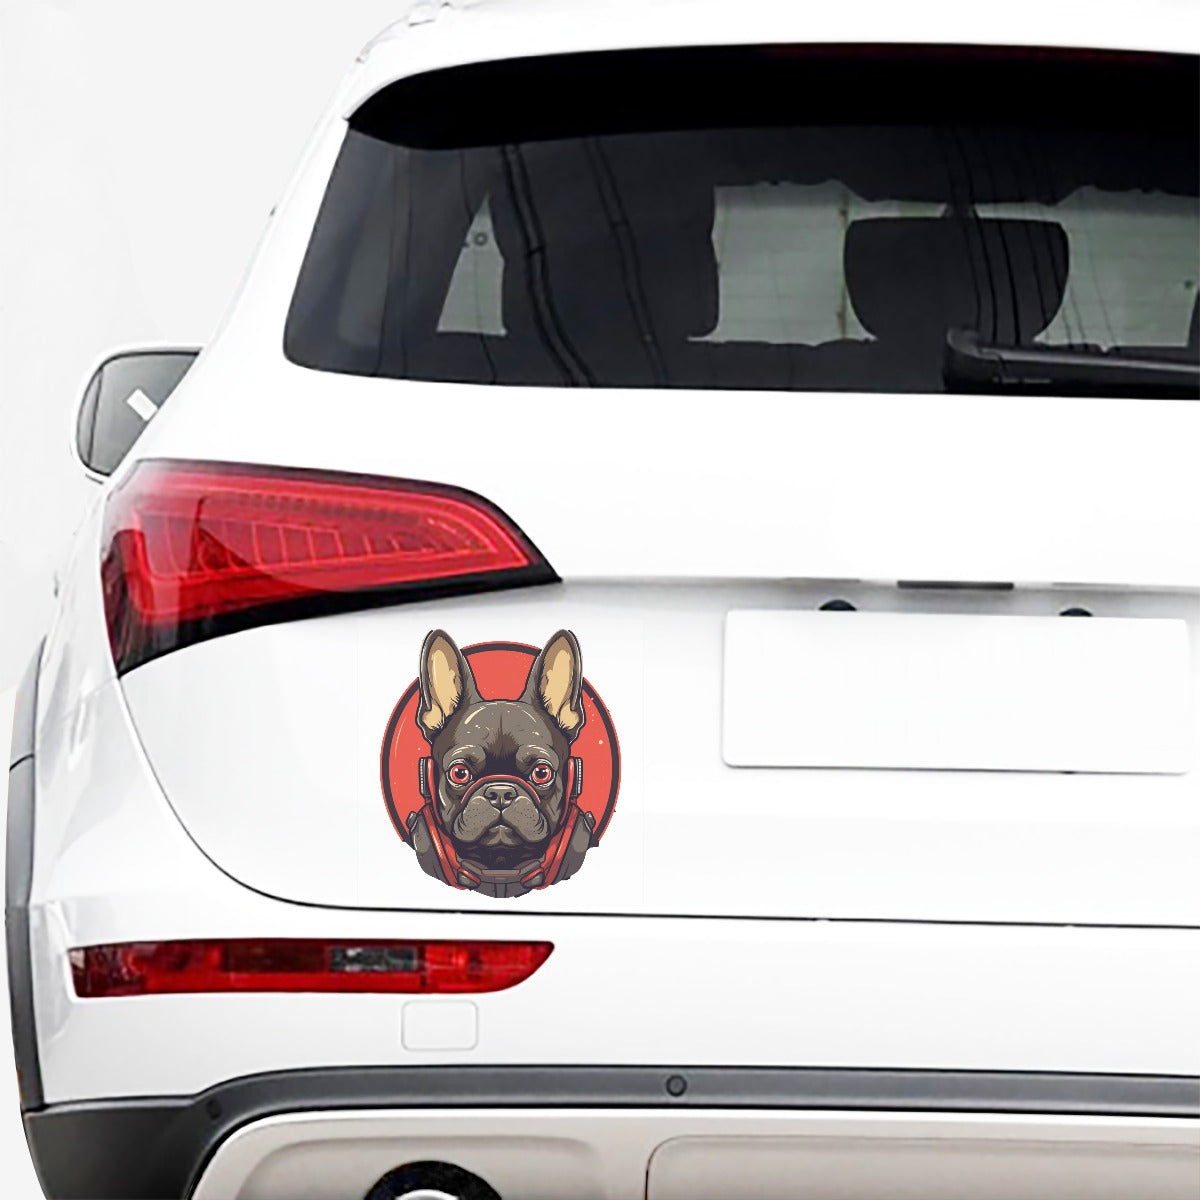 Delightful French Bulldog Vehicle Sticker - A Must-Have for Dog Devotees